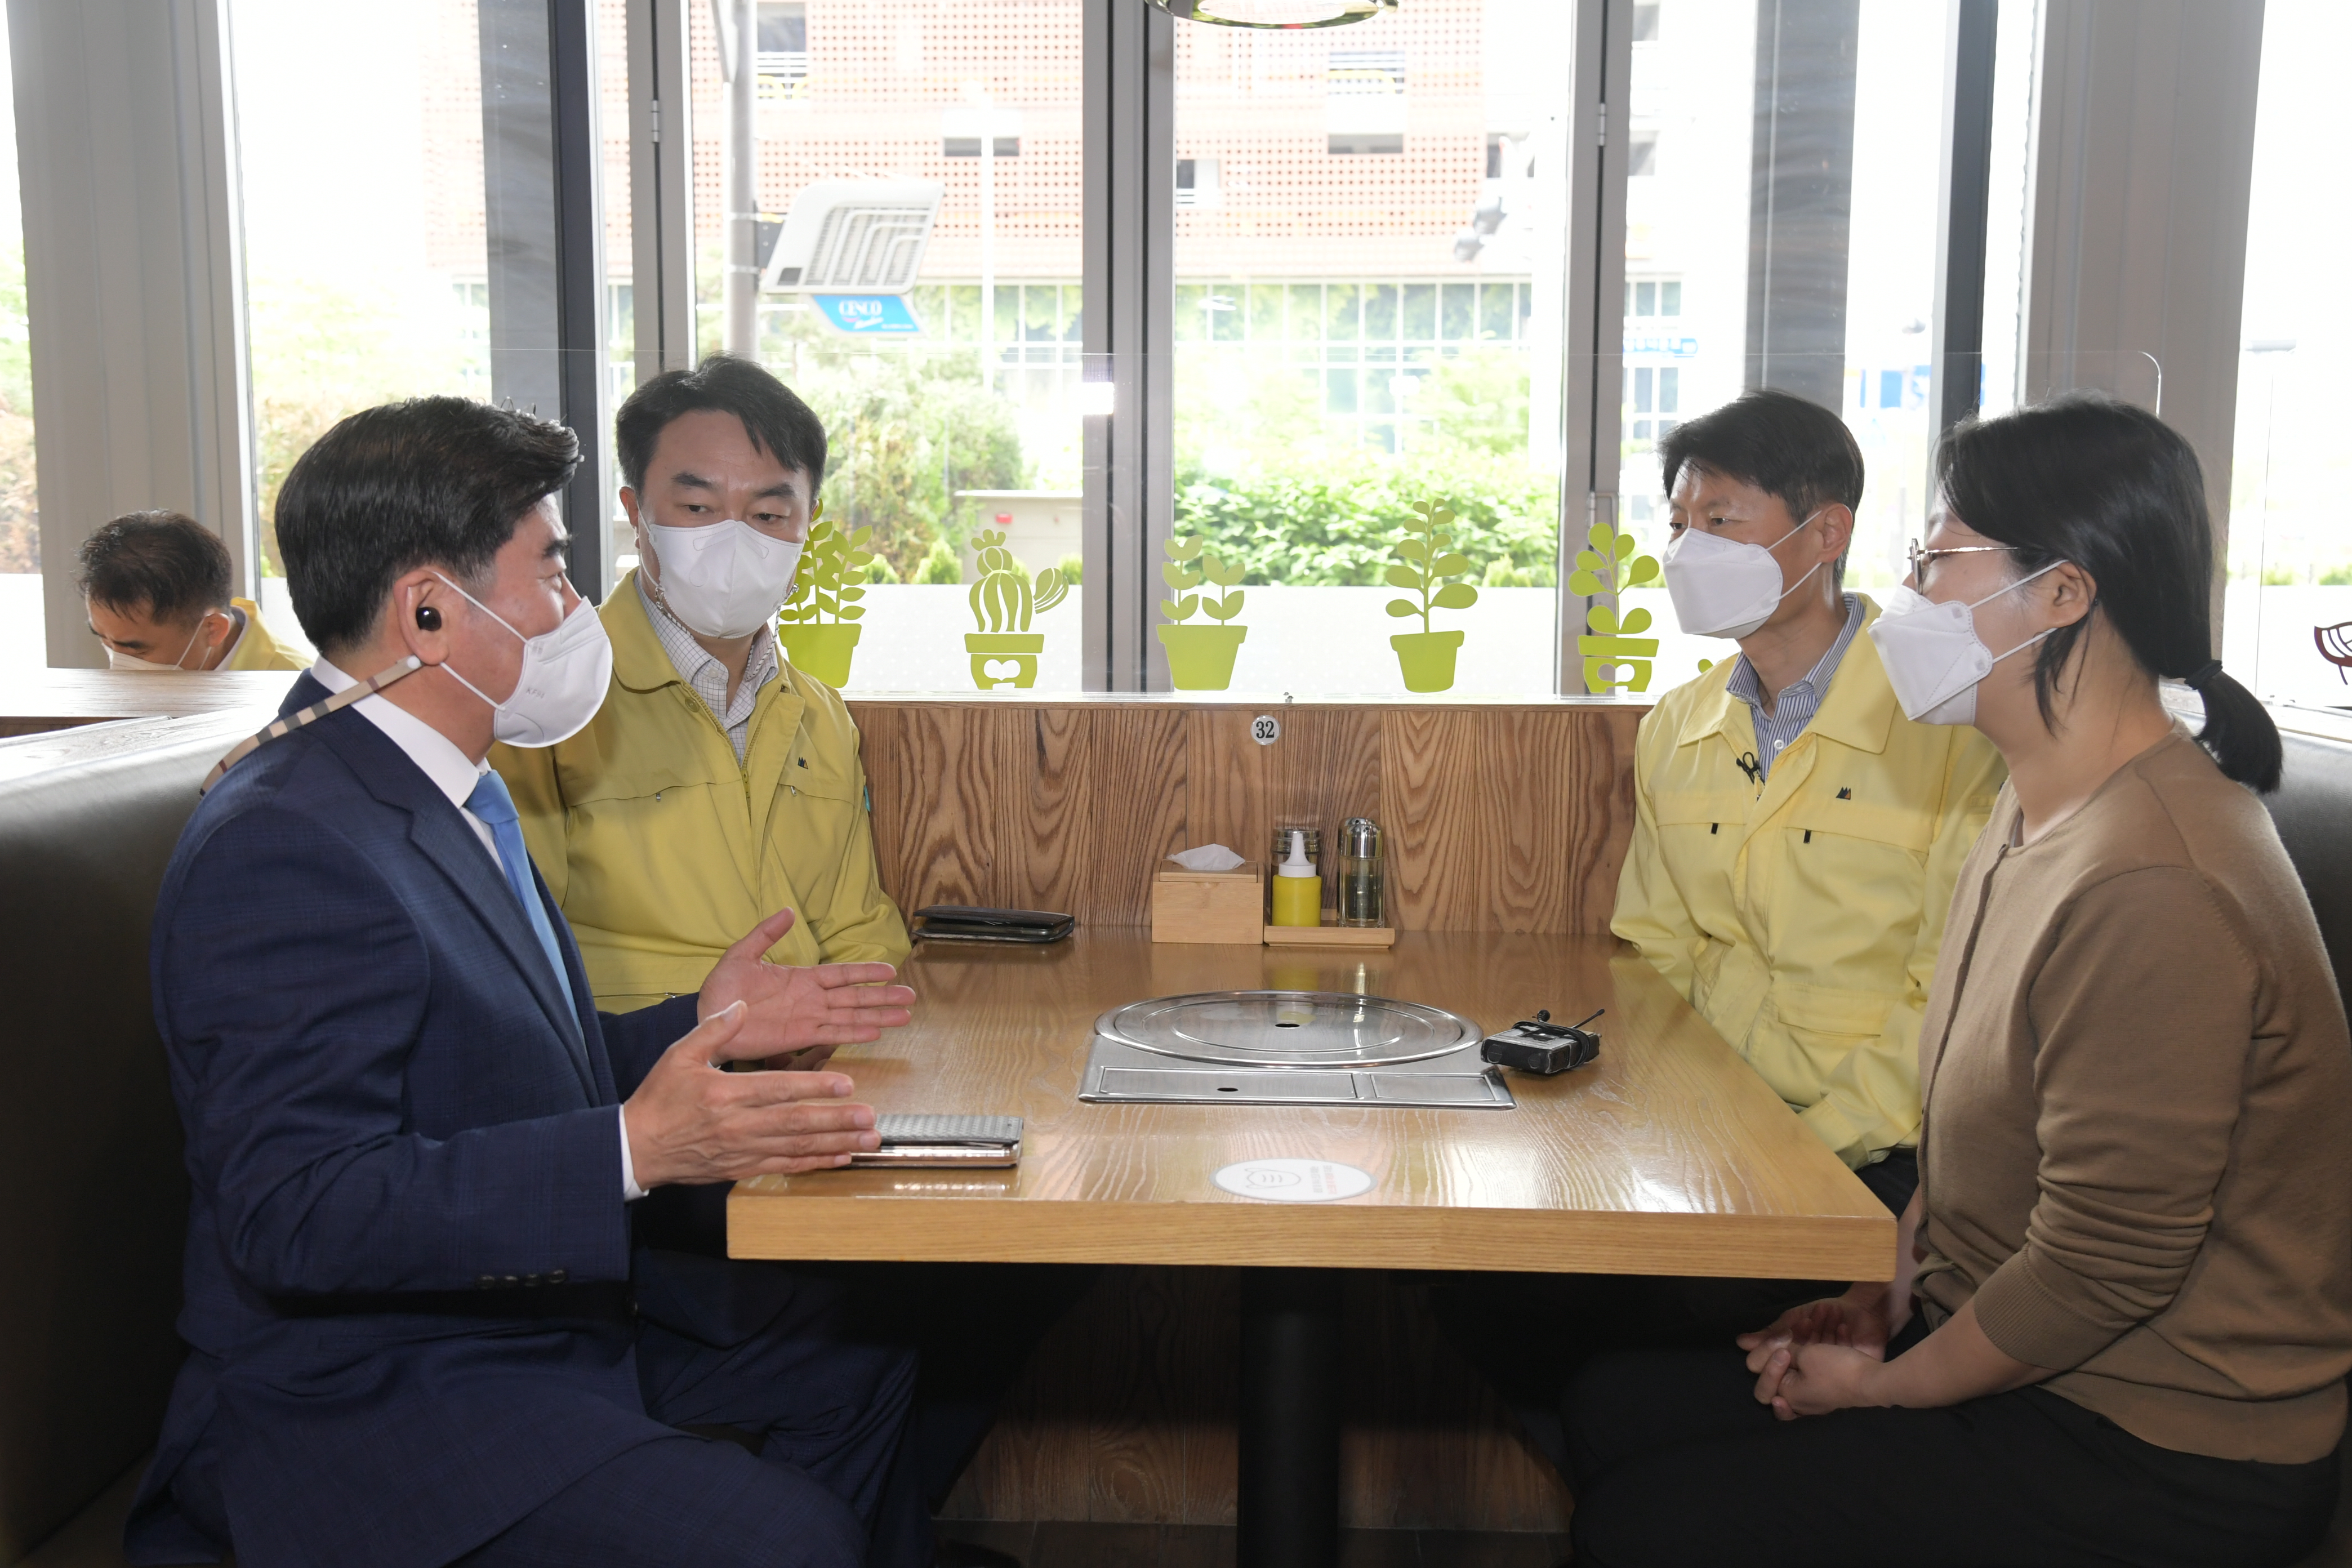 Photo News2 - [April 24, 2021] Minister inspects restaurants to check COVID-19 anti-epidemic measures